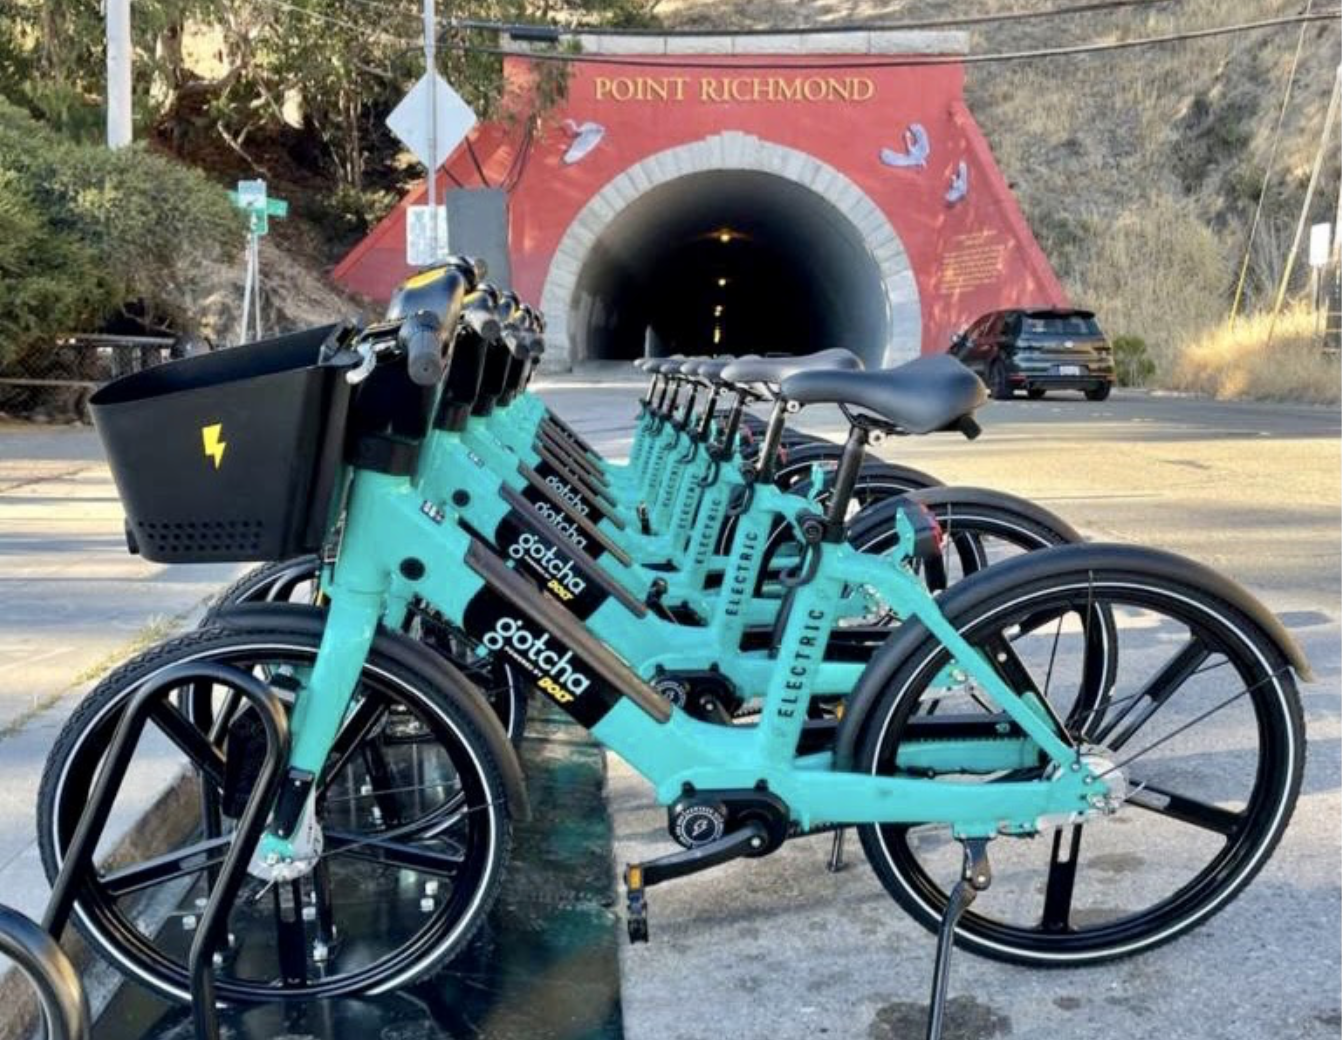 Teal electric bikes lined up in Richmond, California